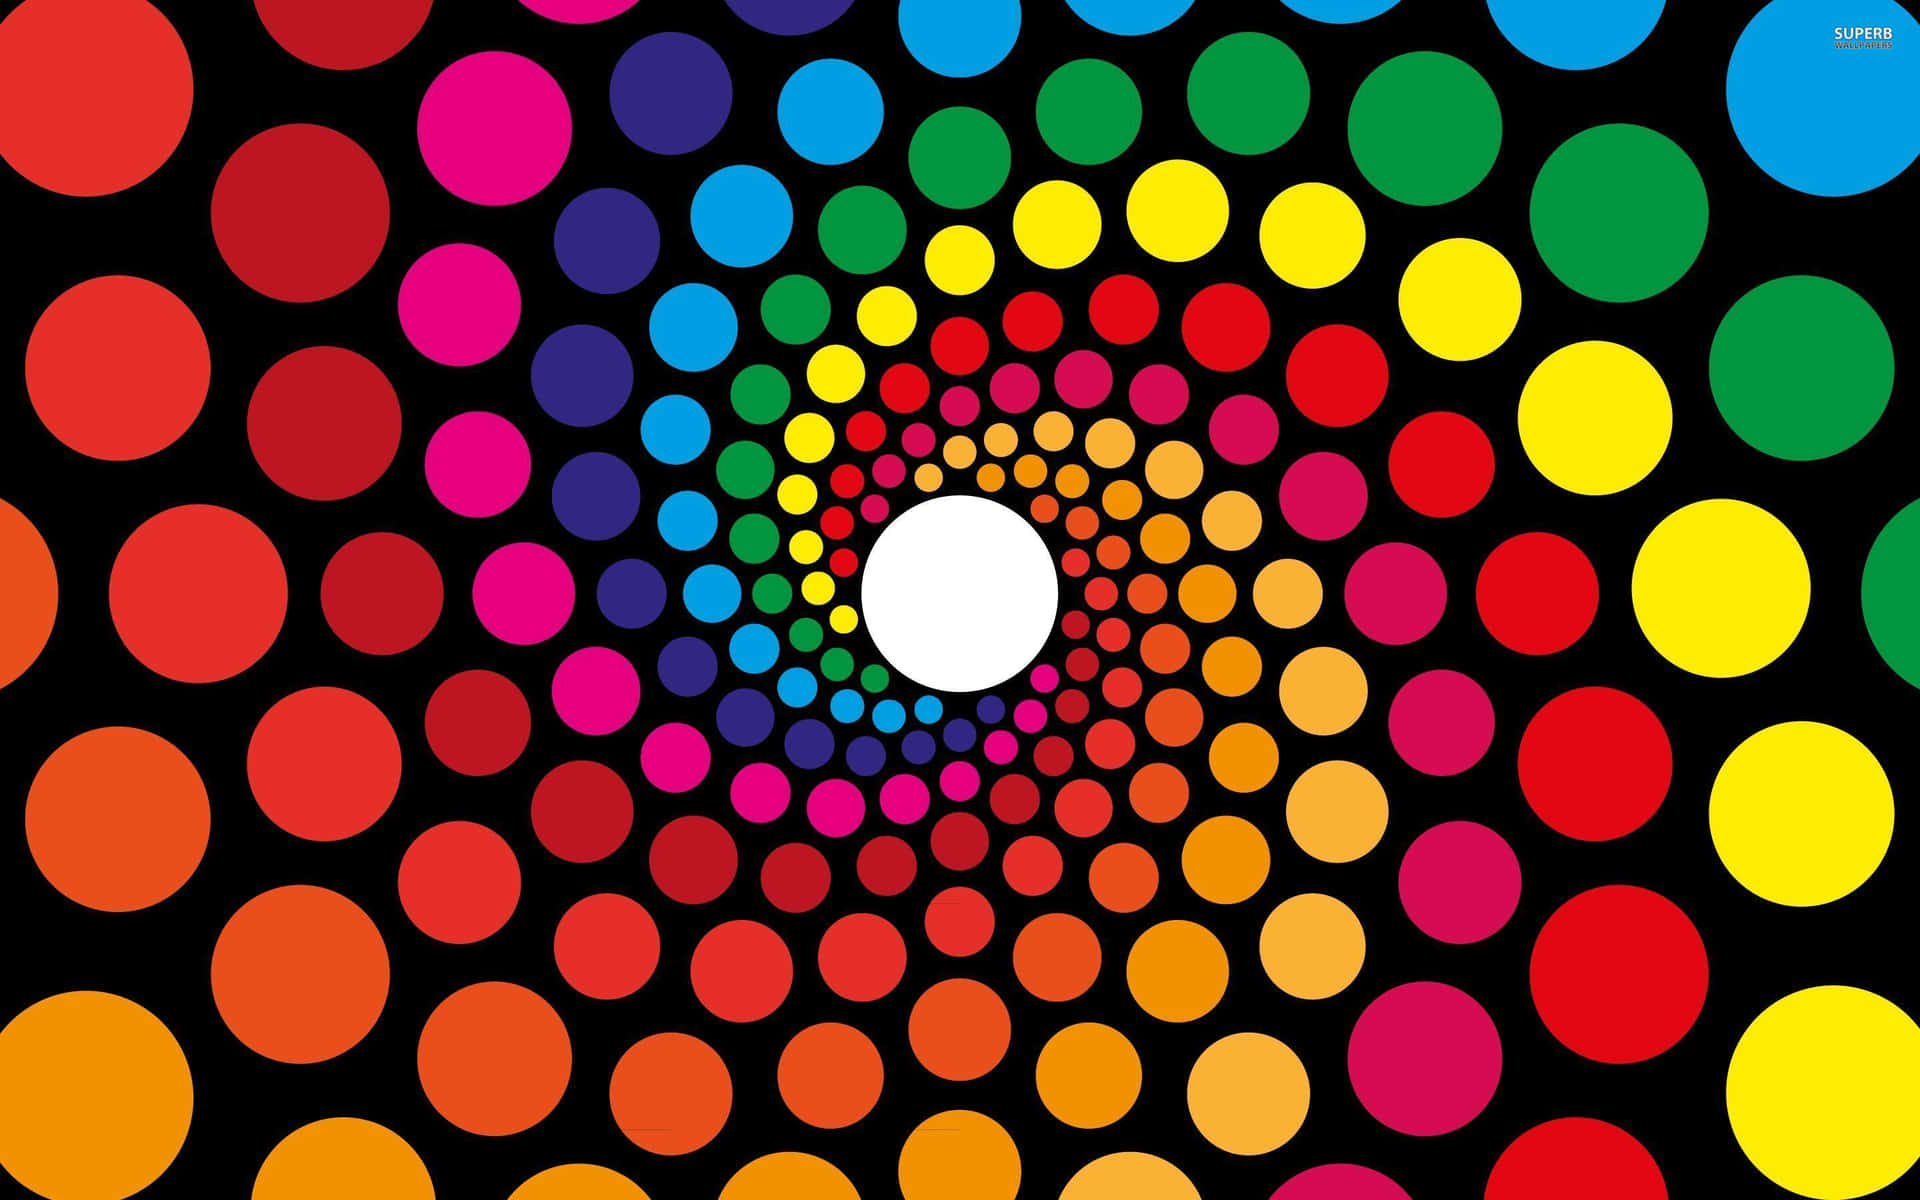 A Colorful Spiral Pattern With A Circle In The Middle